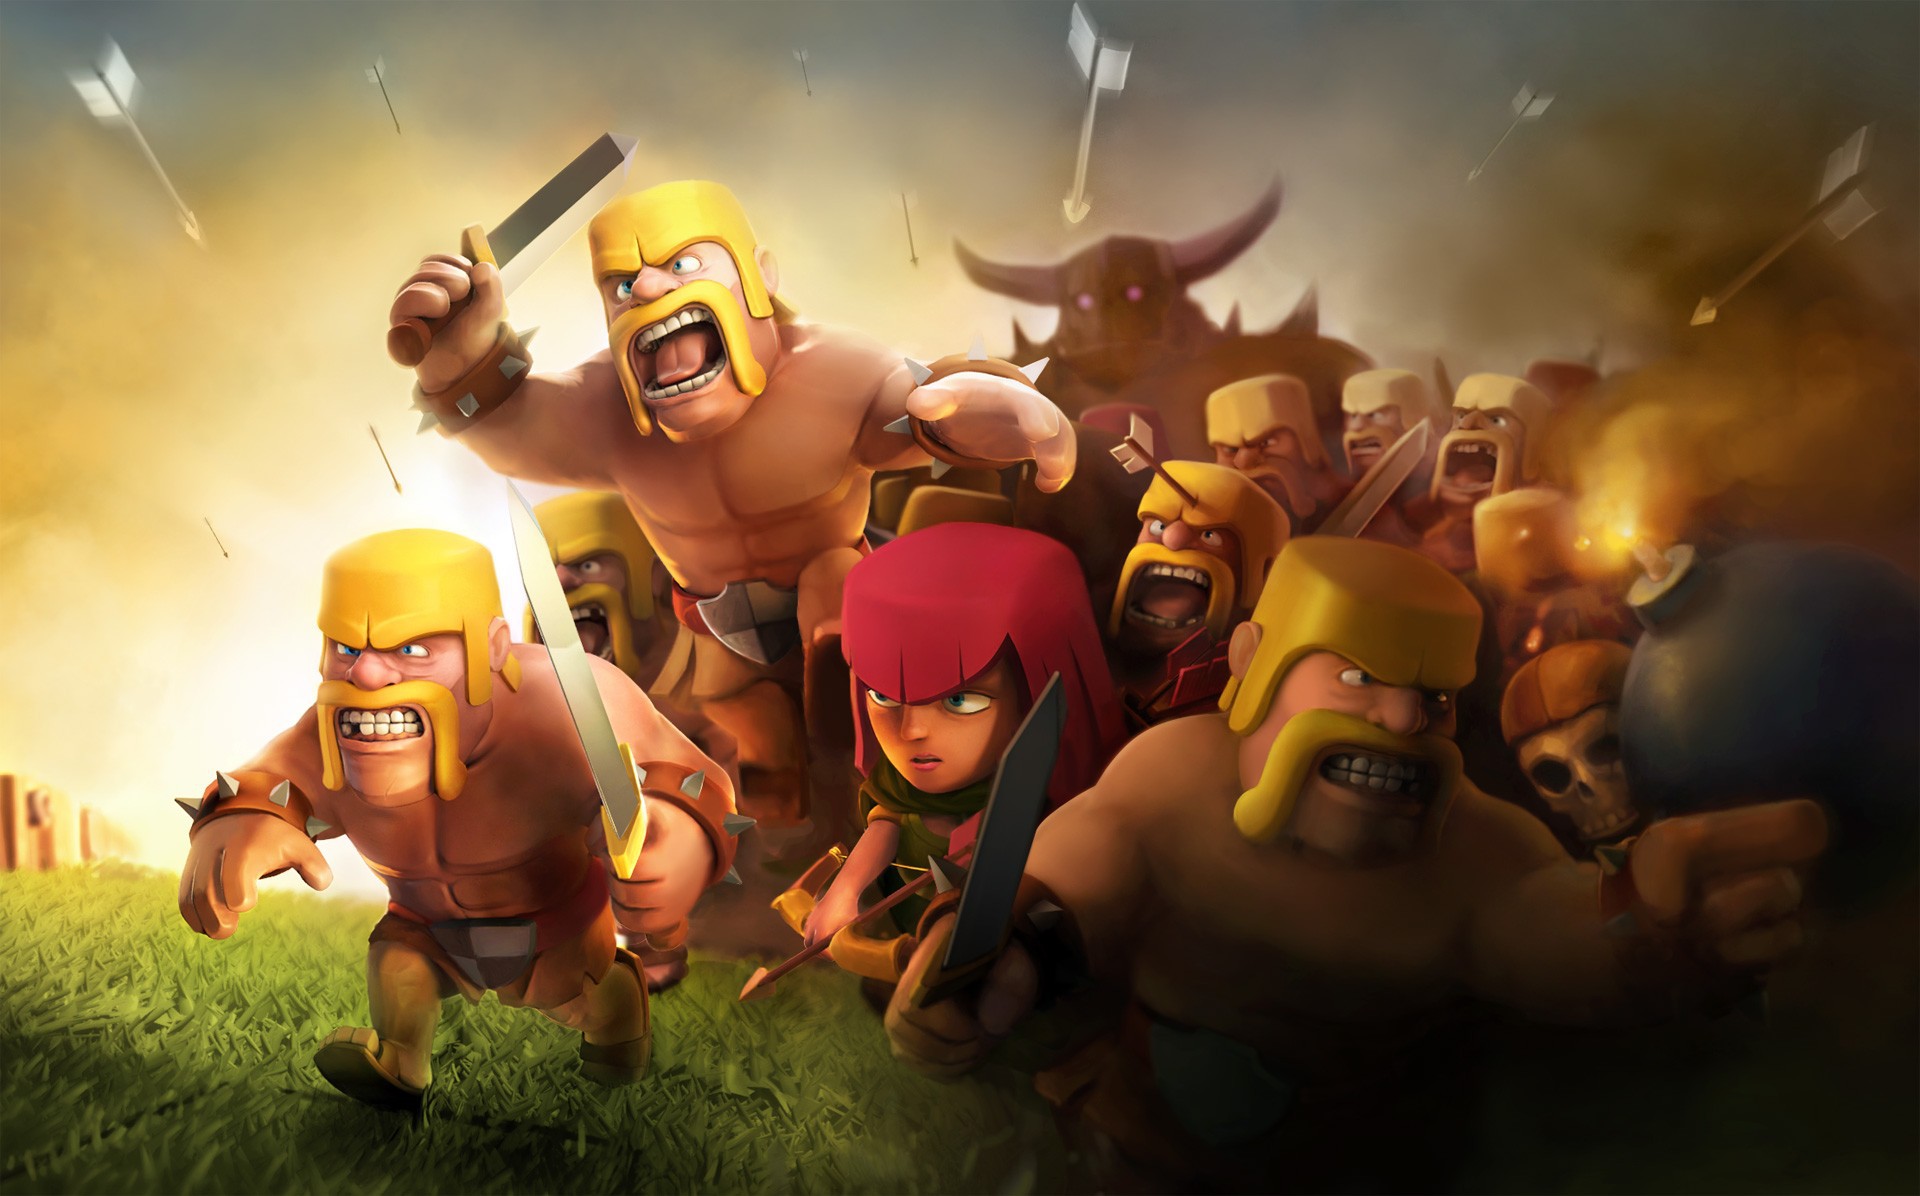 a download for clash of clans for android